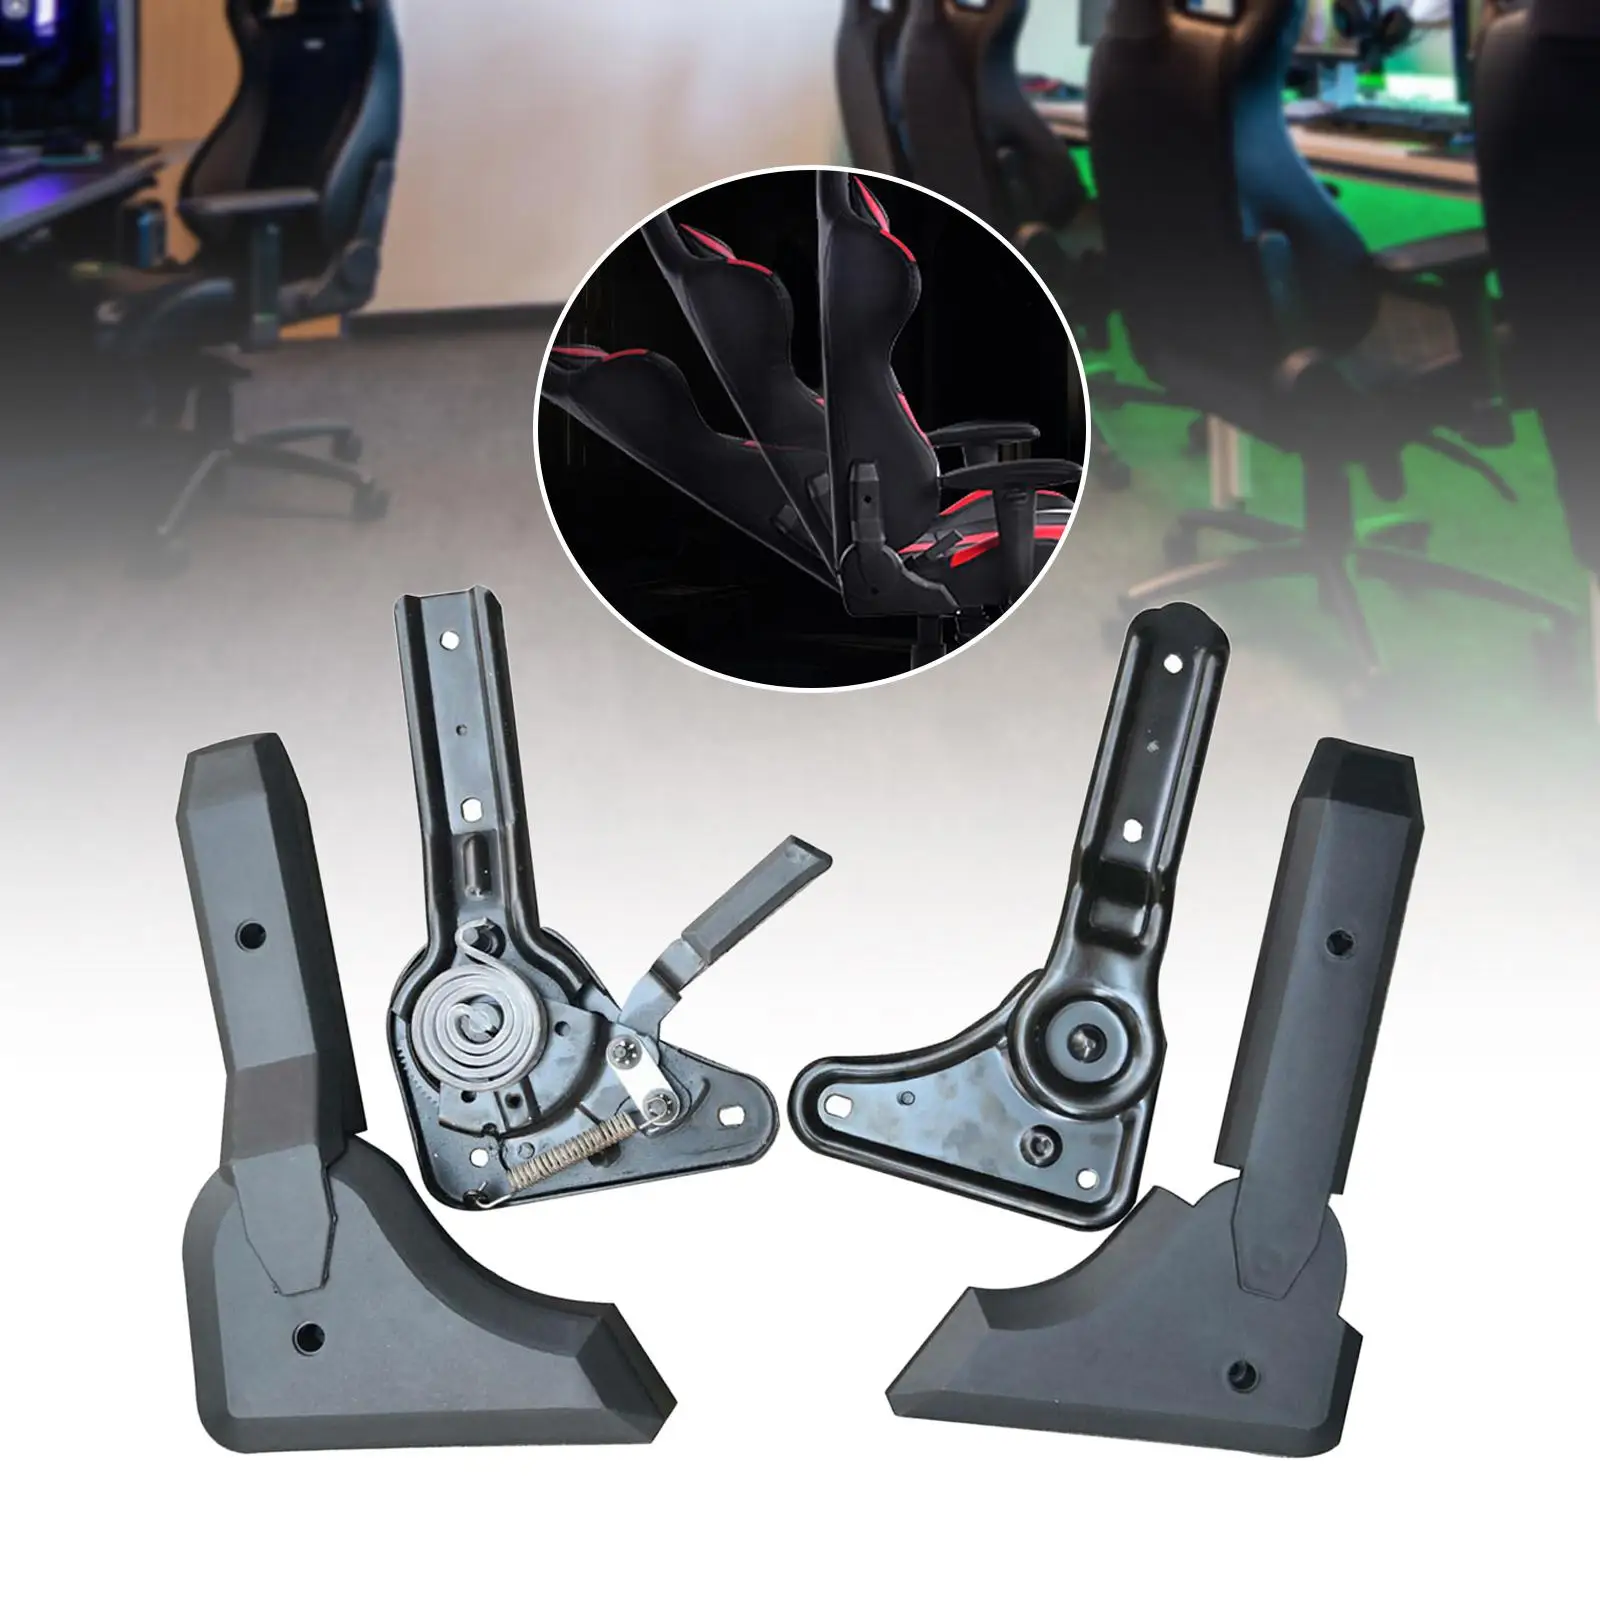 Chair Angle Adjuster Replacement Office Chair Computer Chair Accessories Gaming Chair Tuner Parts Rotating Desk Metal Regulator